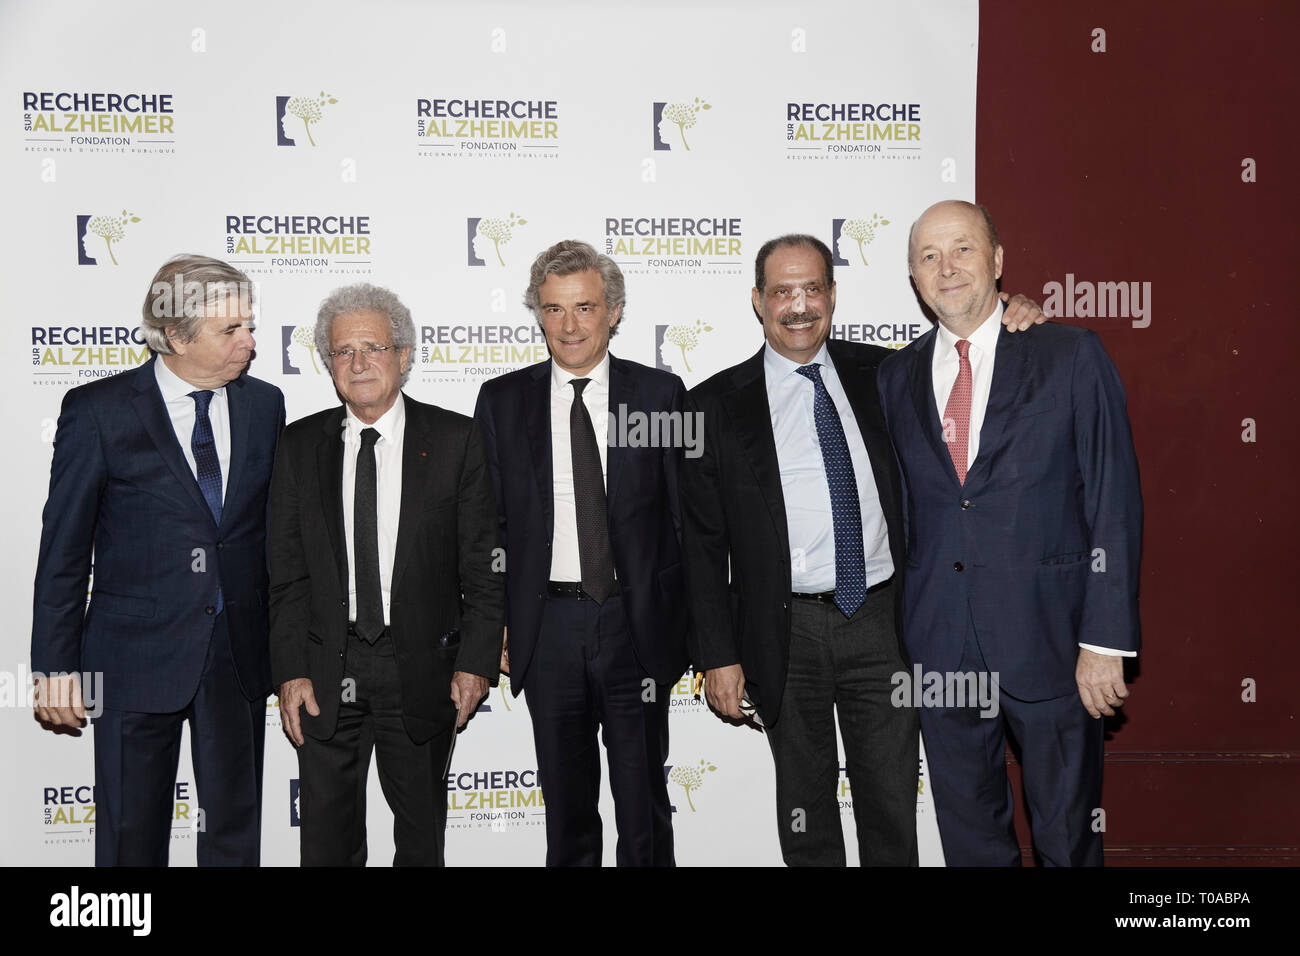 Paris, France. 18th Mar 2019. Pr Bruno Dubois (L), Guests and Olivier De Ladoucette (R) - Photocall of the 14th Gala 2019 of the Association for Alzheimer Research at the Olympia in Paris on March 18, 2019 Credit: Véronique PHITOUSSI/Alamy Live News Stock Photo